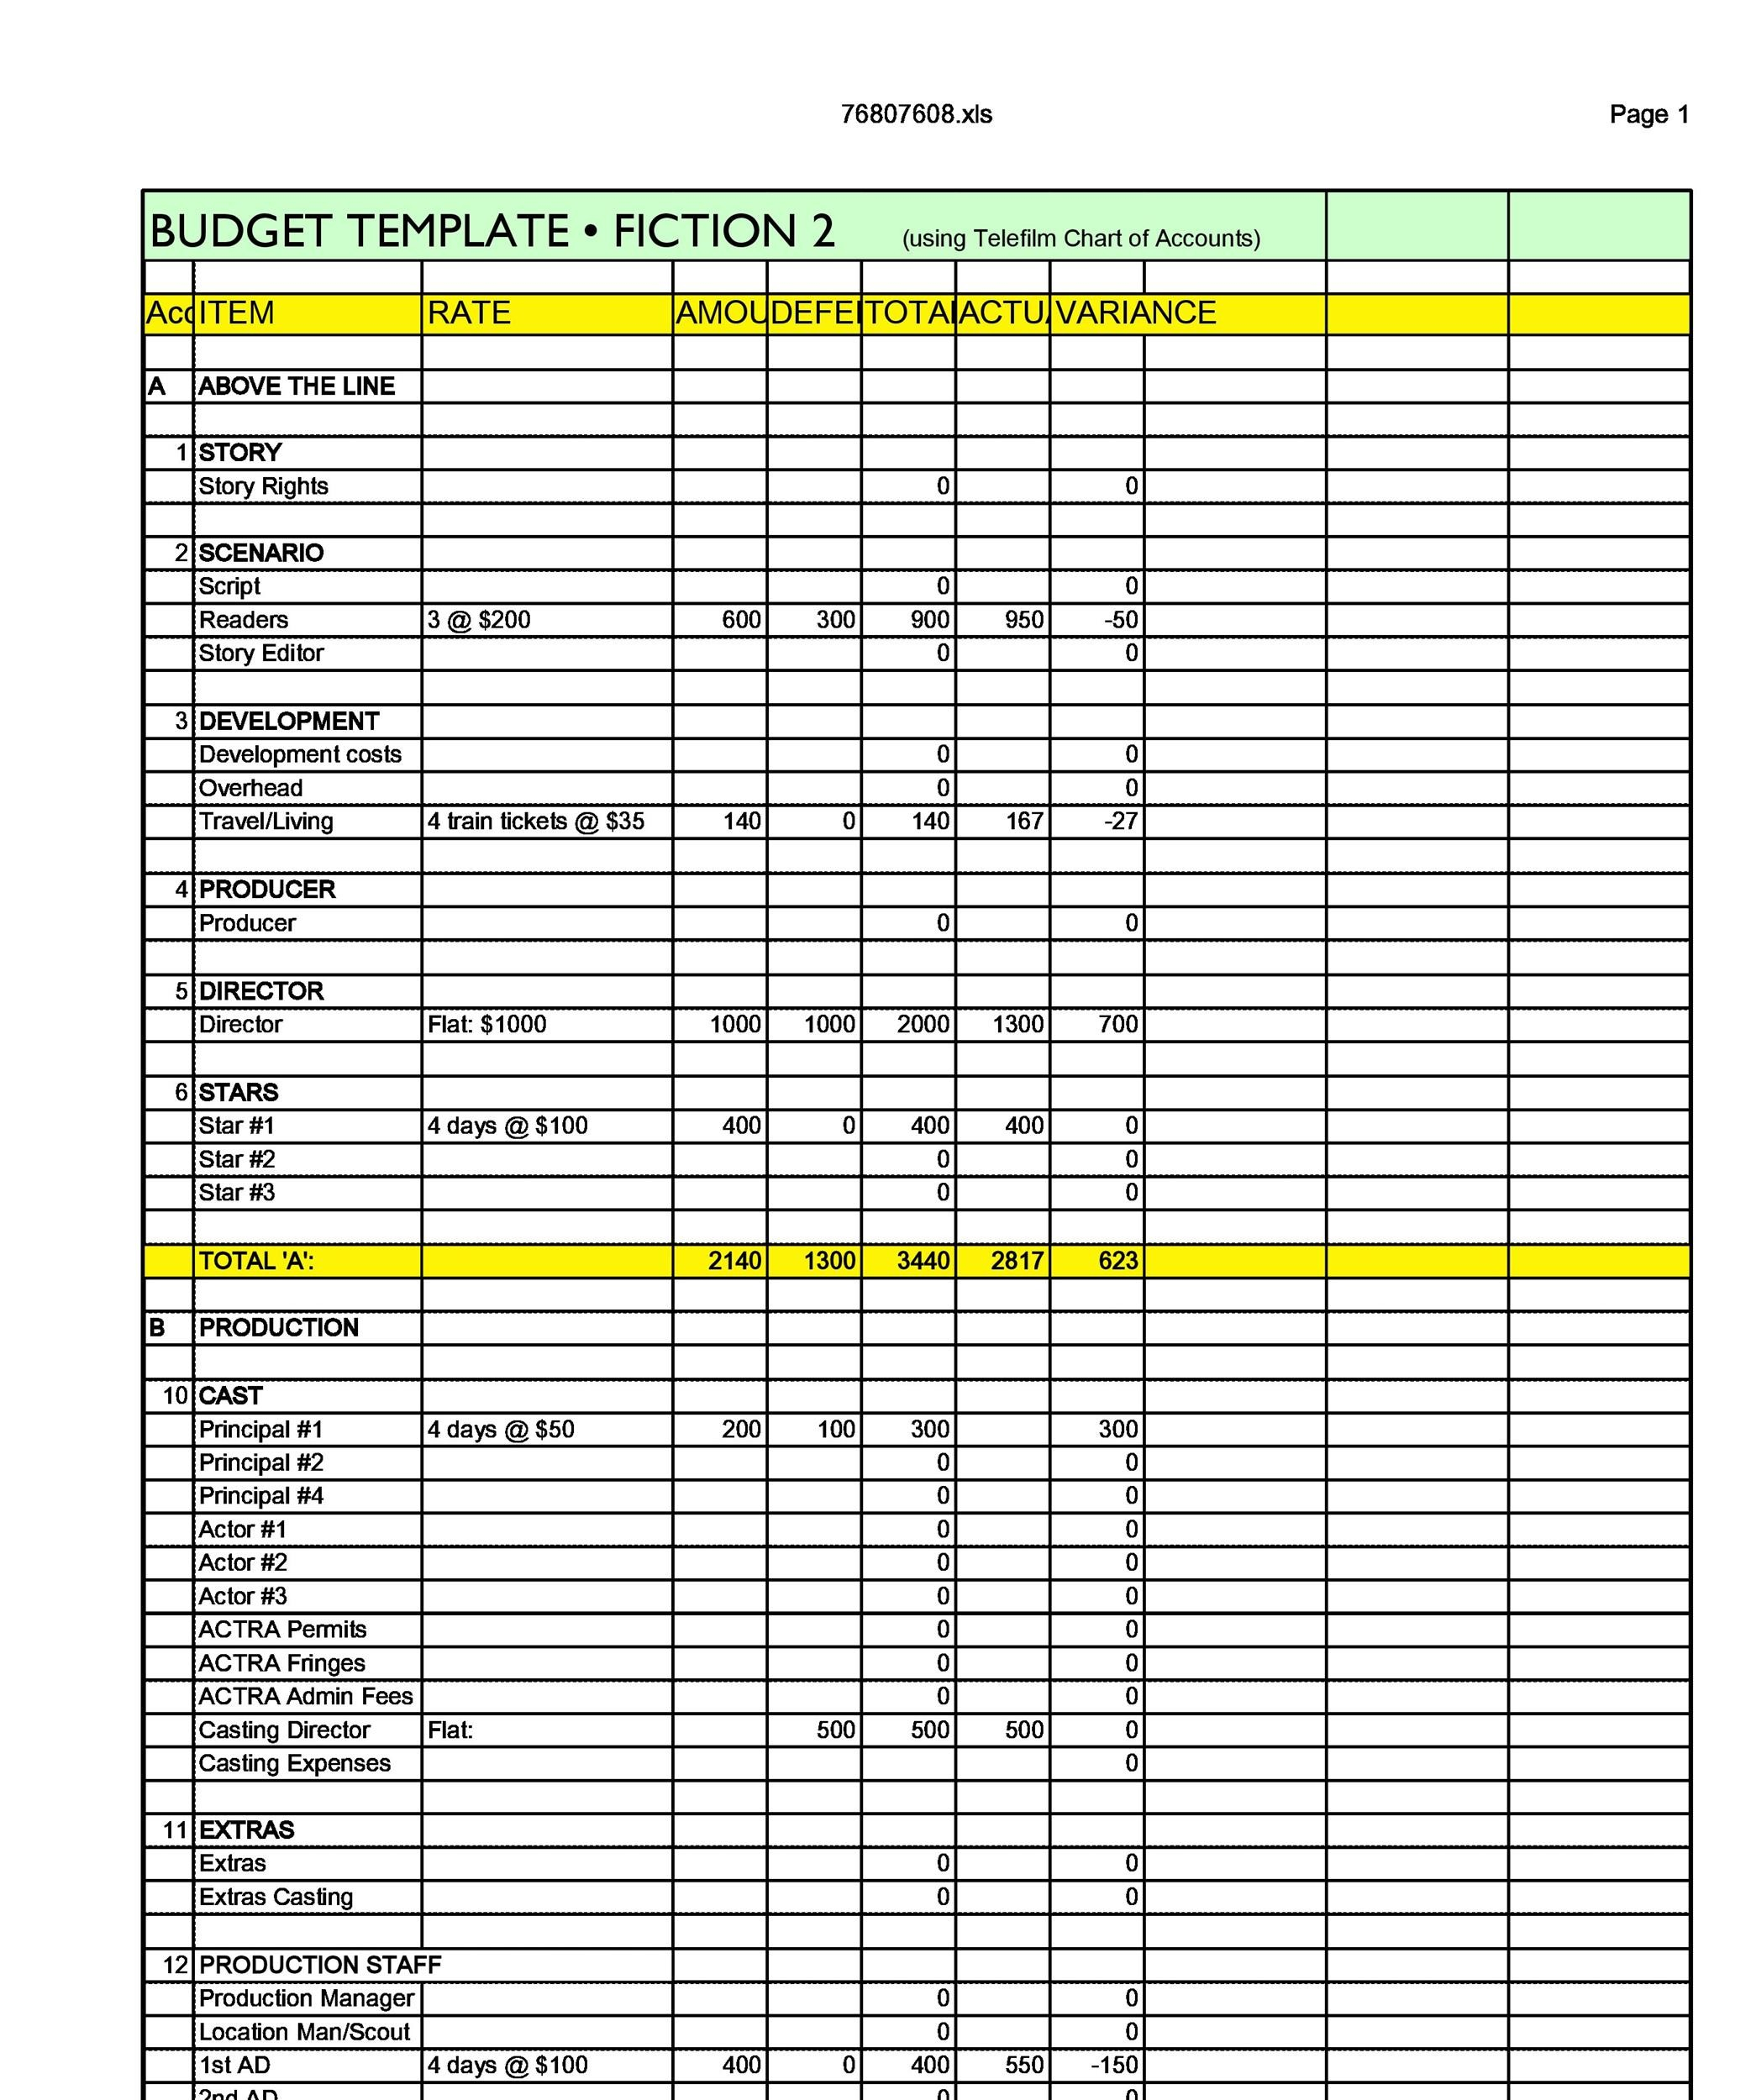 11 Free Film Budget Templates (Excel, Word) ᐅ TemplateLab Inside Student Film Budget Template Within Student Film Budget Template